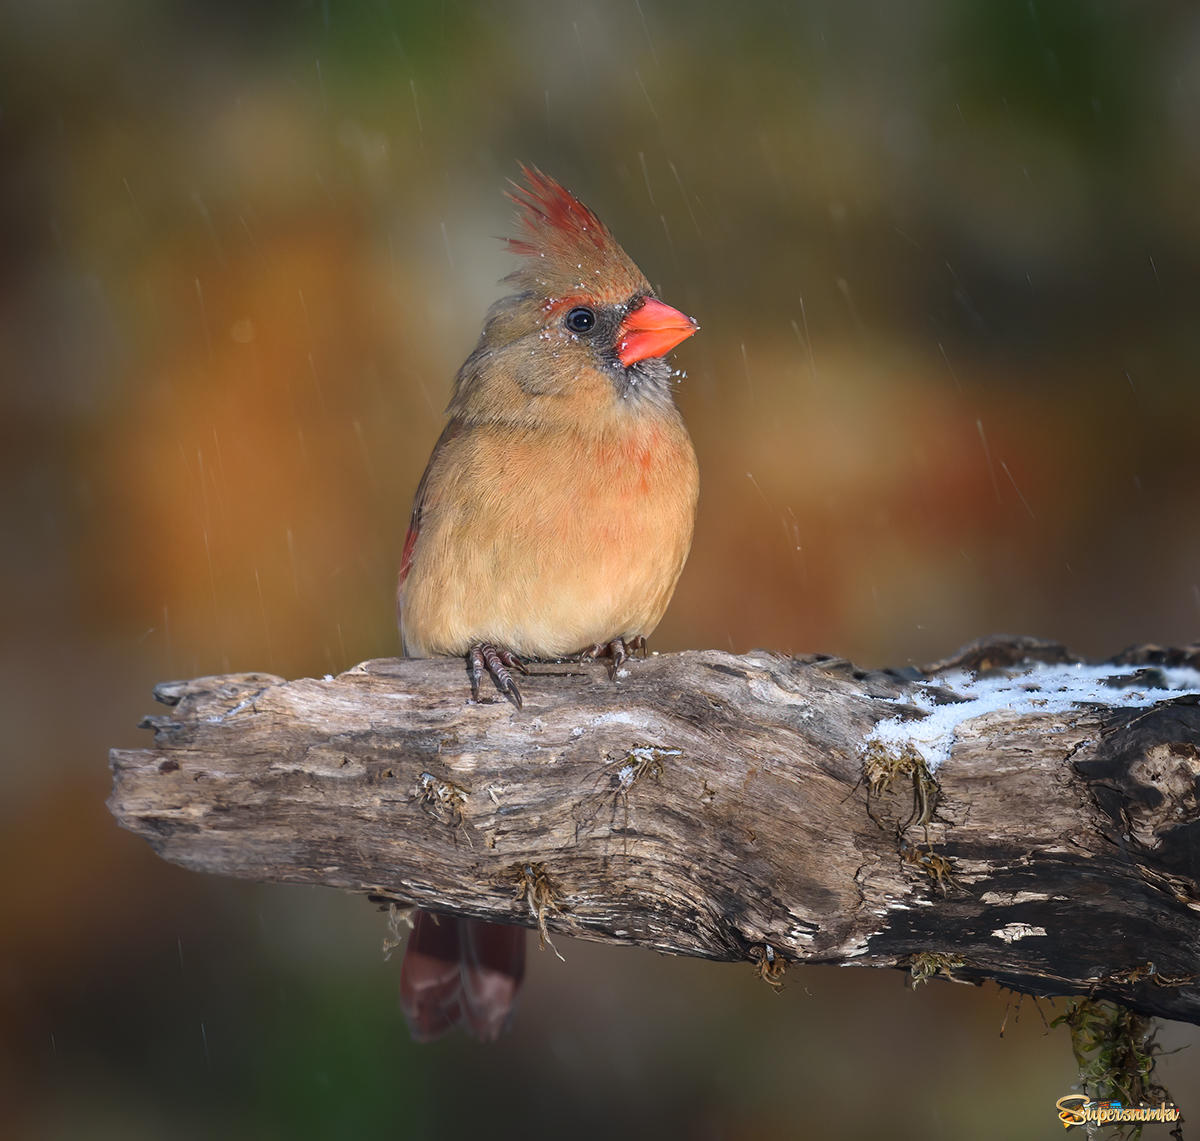 Northern cardinal (female) & Happy New Year!